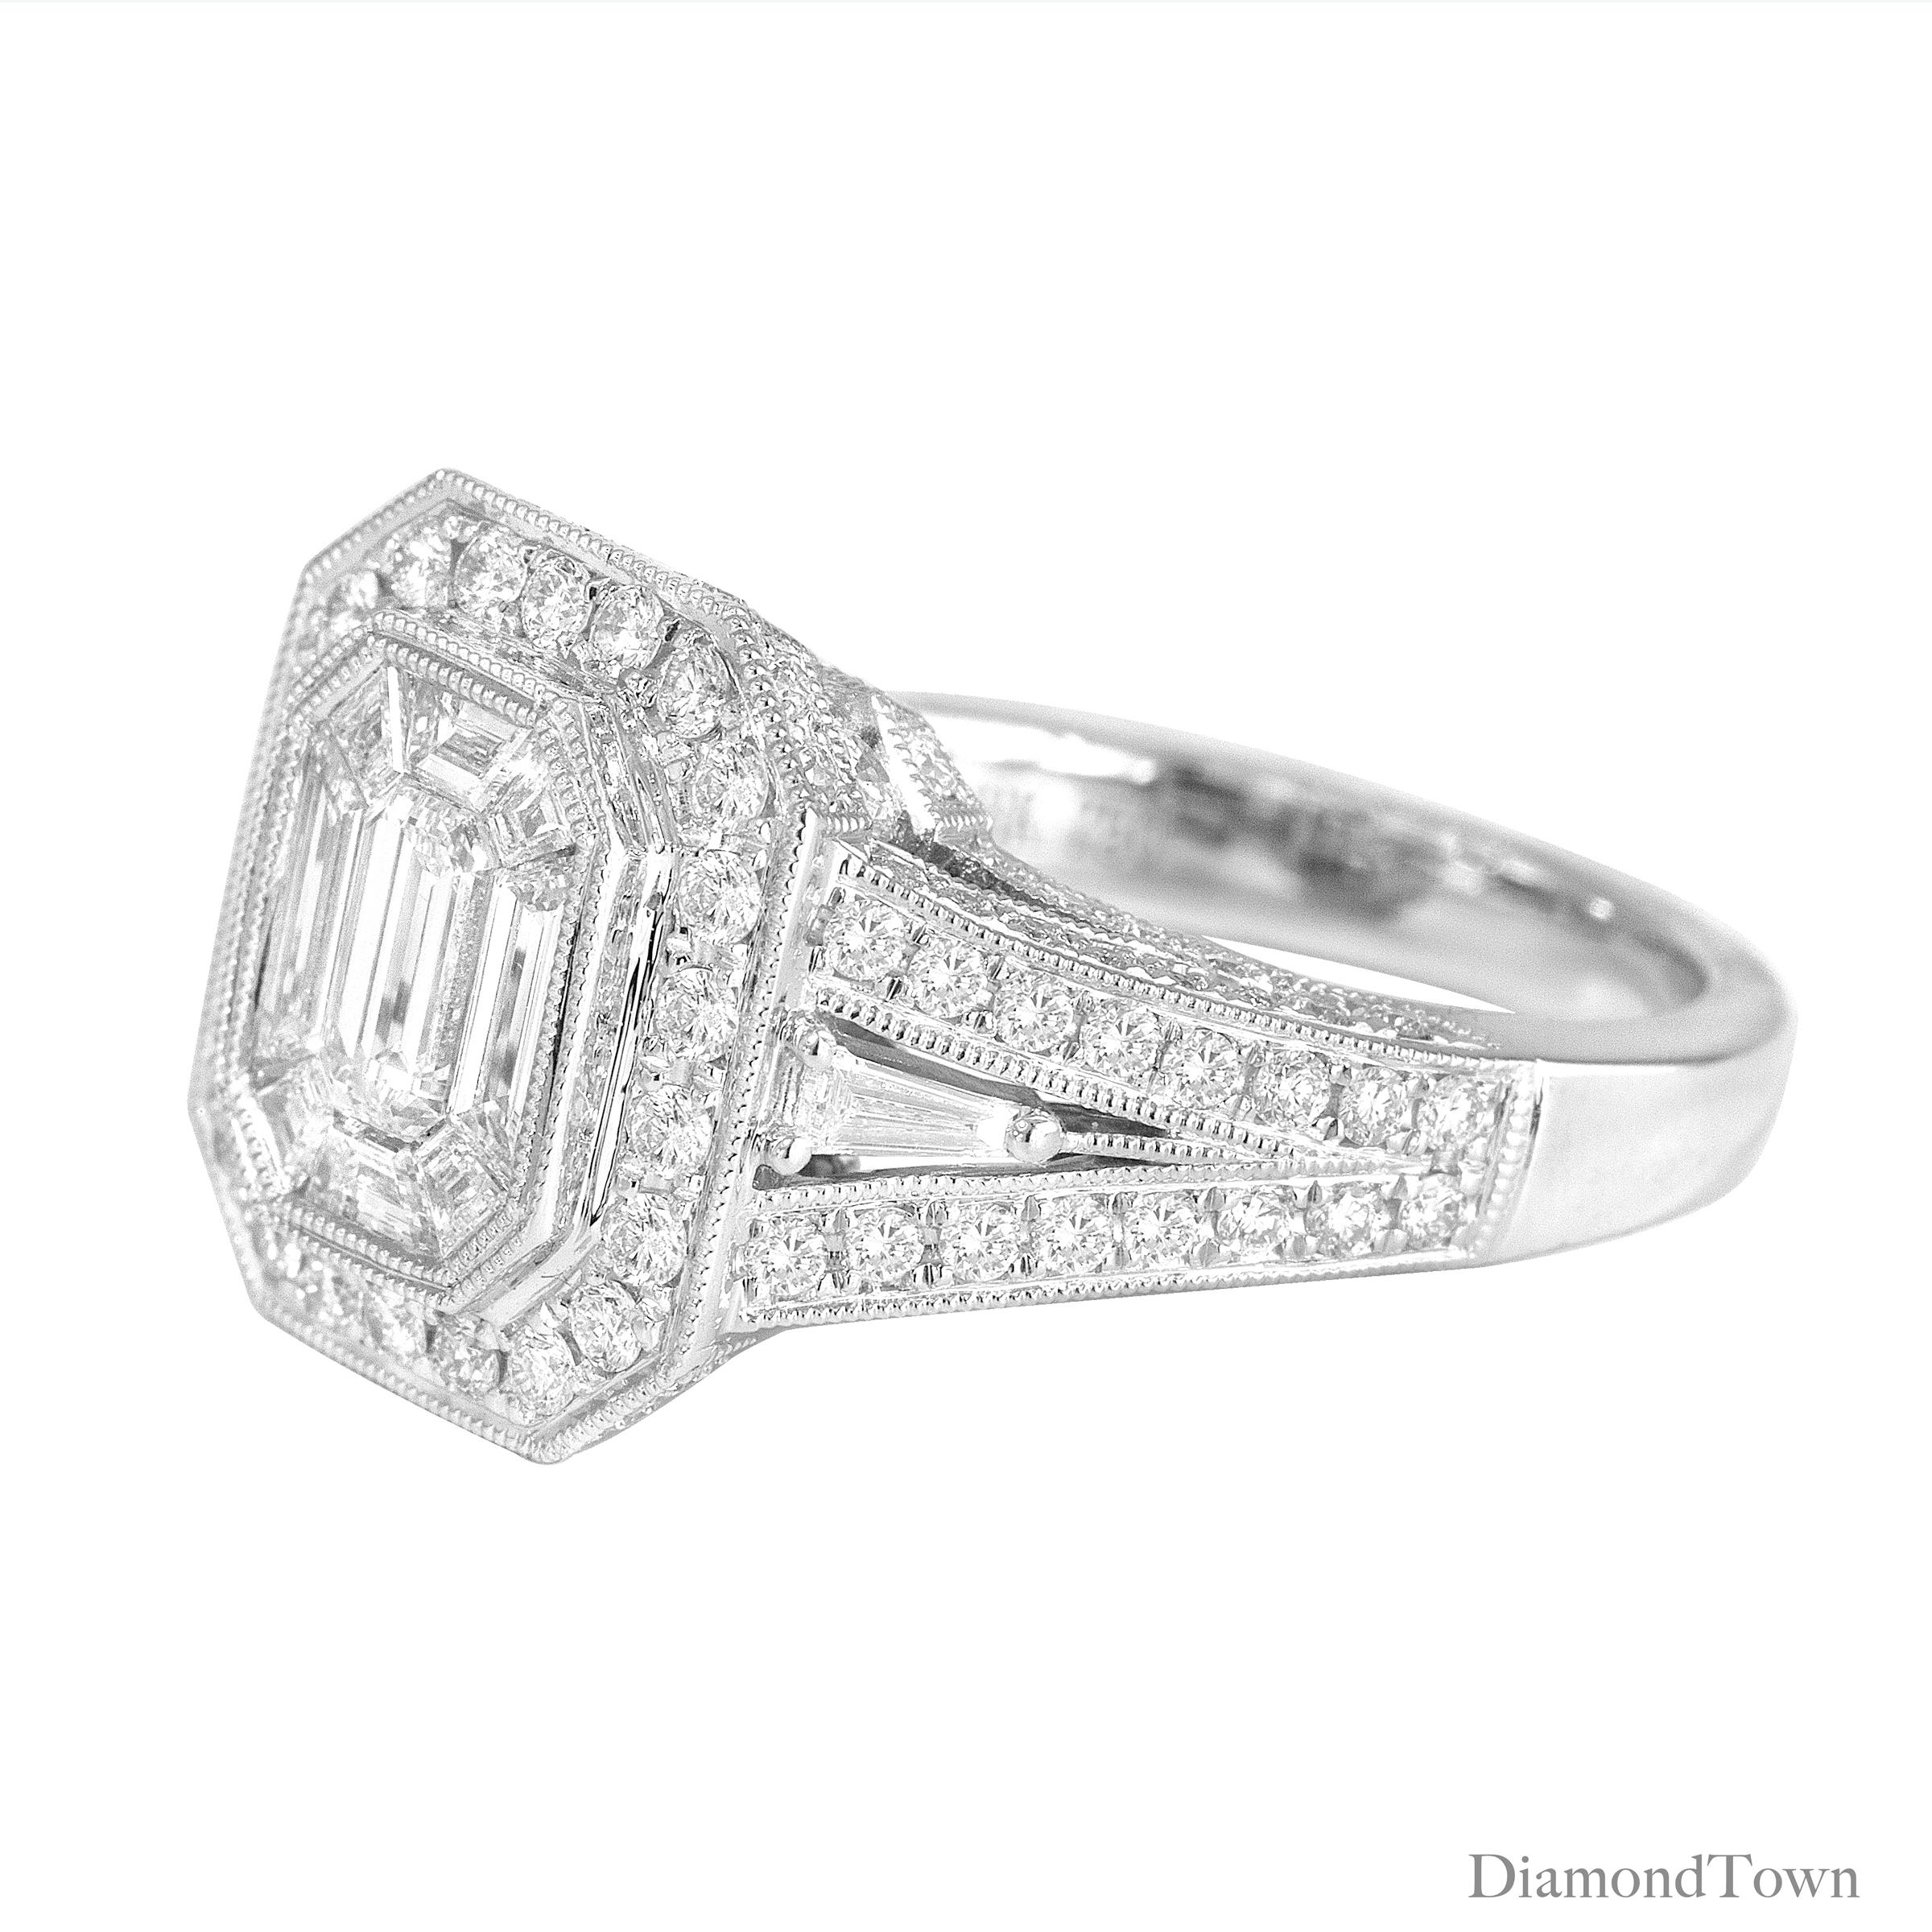 At its heart, this ring features a central cluster of baguette diamonds with a combined weight of 0.81 carats. These baguette diamonds bring a sense of sophistication and uniqueness, offering a stunning departure from traditional diamond cuts.

An